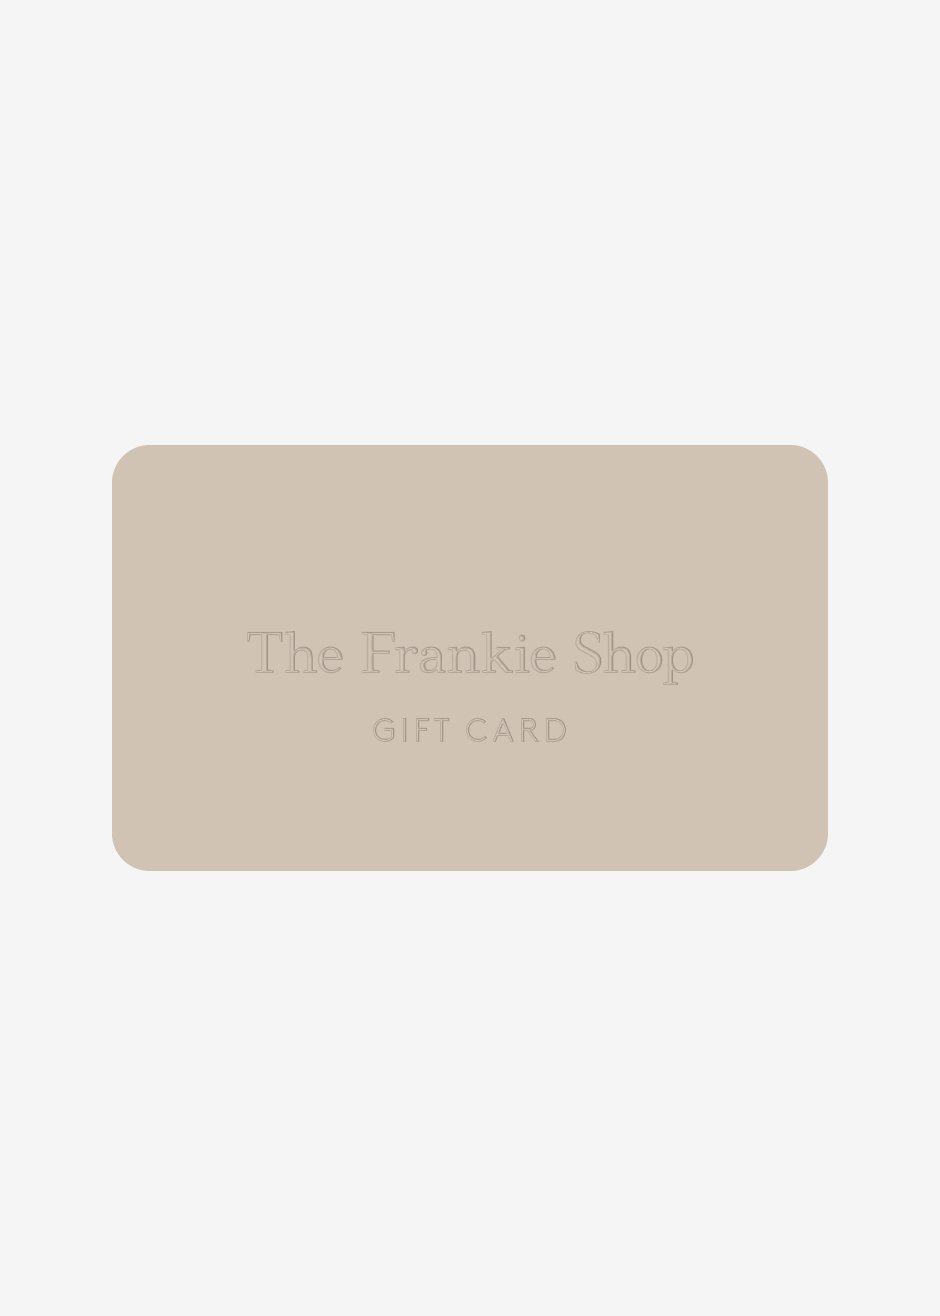 Gift Card Gift Card The Frankie Shop 